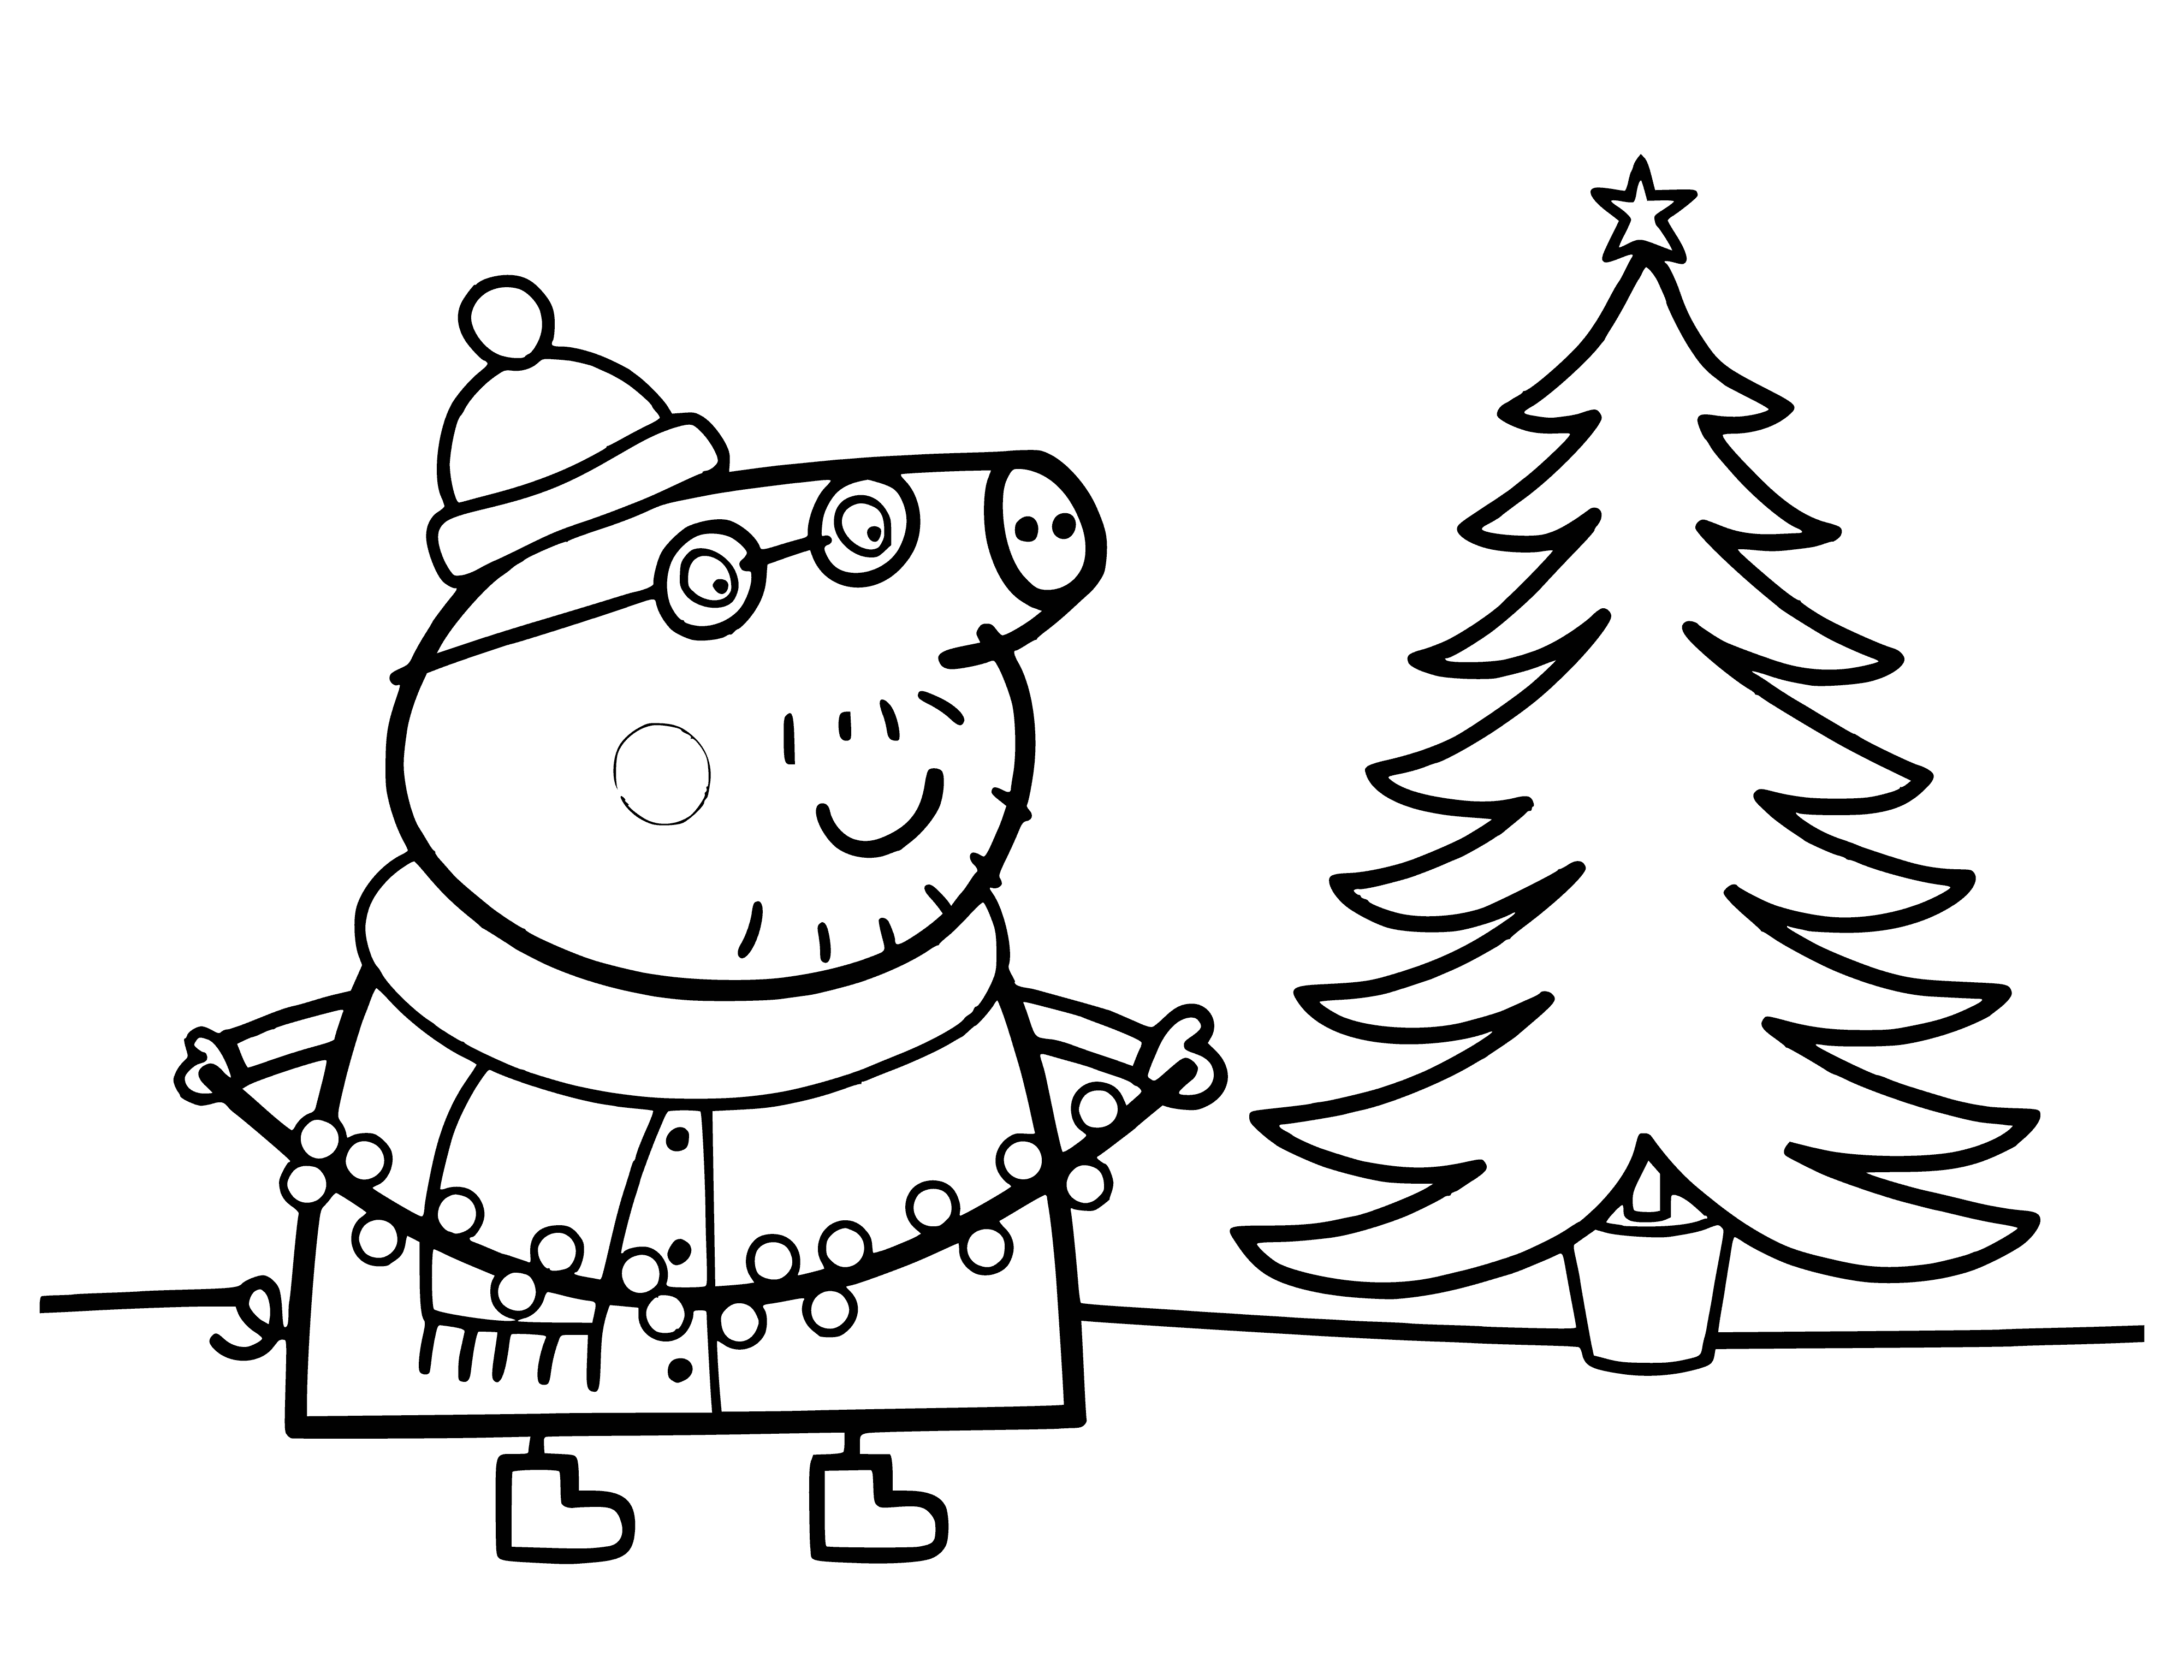 Daddy Pig decorates the Christmas tree coloring page